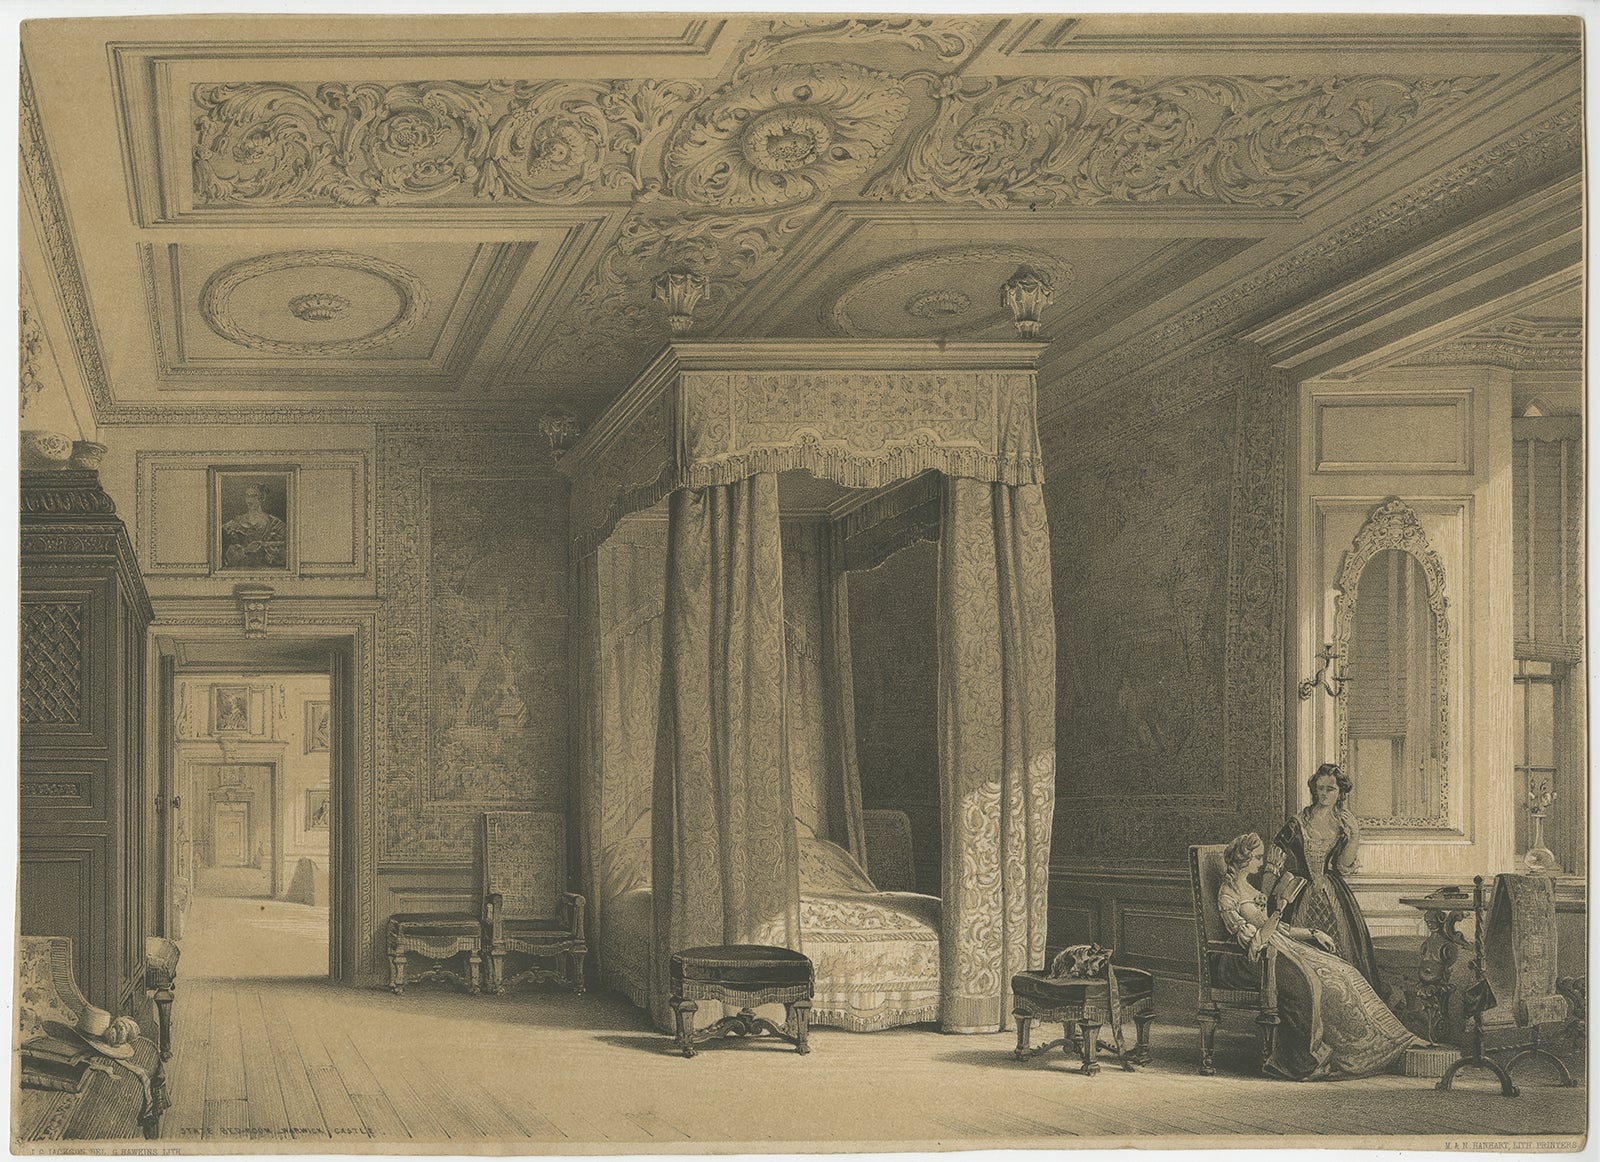 Antique print titled 'State Bedroom-Warwick Castle'. 

Lithograph of the State Bedroom of the famous Warwick Castle in England.

Warwick Castle is a medieval castle developed from a wooden fort, originally built by William the Conqueror during